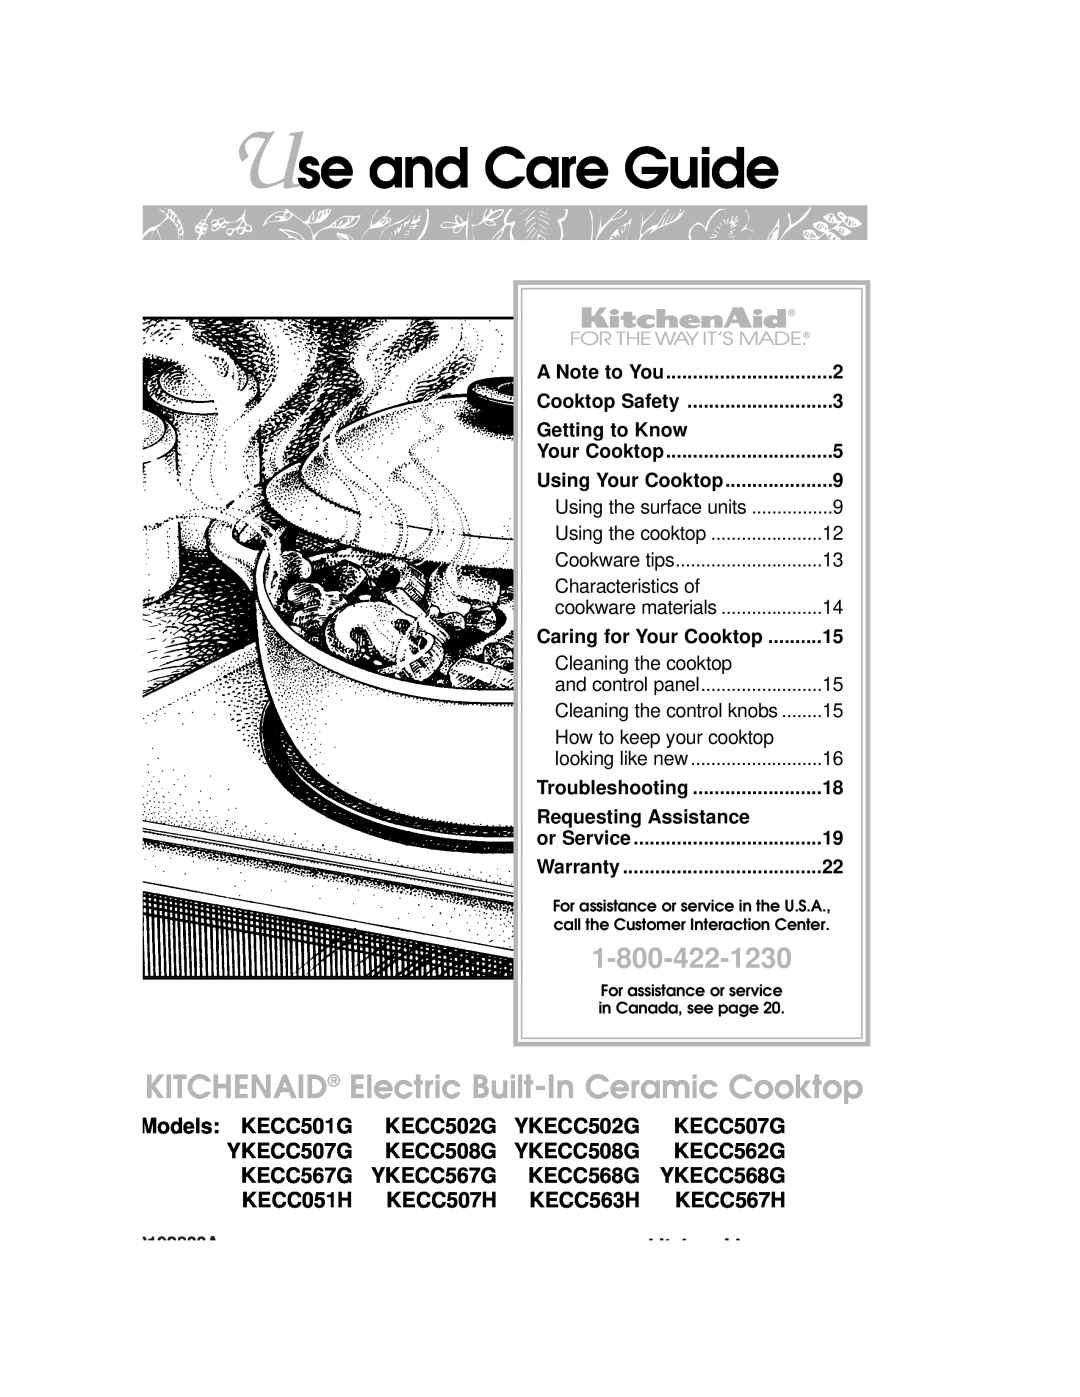 KitchenAid YKECC502G warranty Use and Care Guide, KITCHENAID Electric Built-In Ceramic Cooktop, 192800A, Getting to Know 